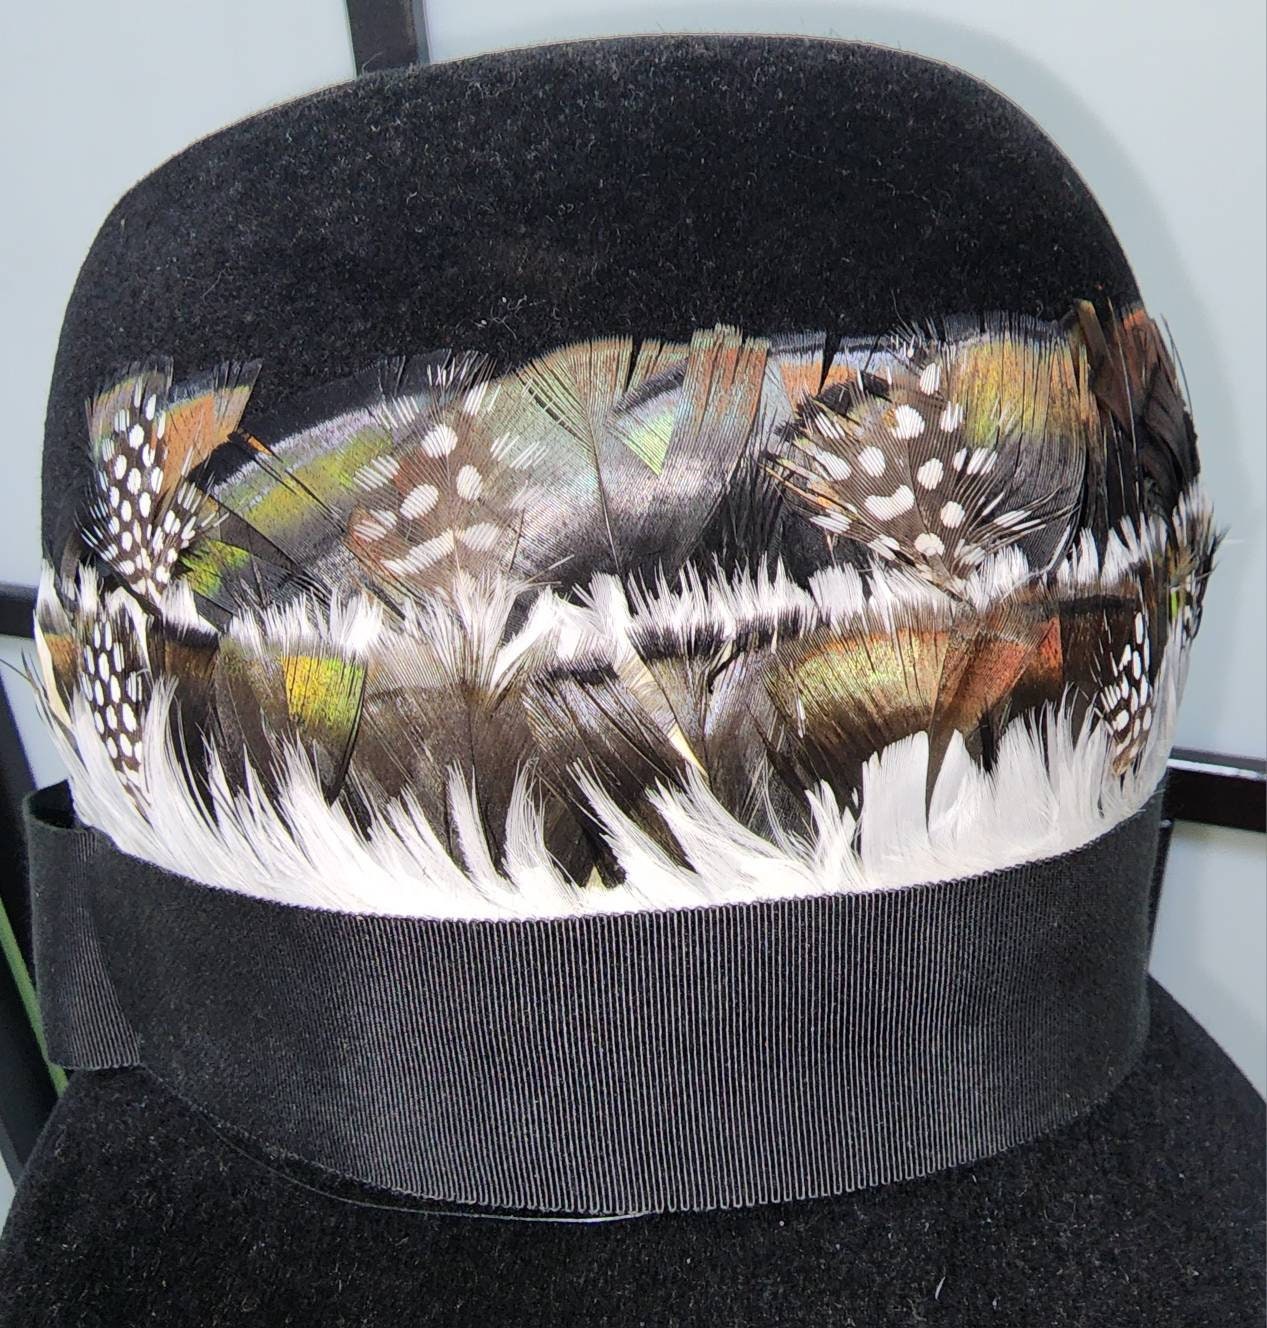 Vintage Feather Hat 1960s Tall Round Black Wool Felt Bucket Hat Black White Brown Feathers Mod Boho 21.5 inches